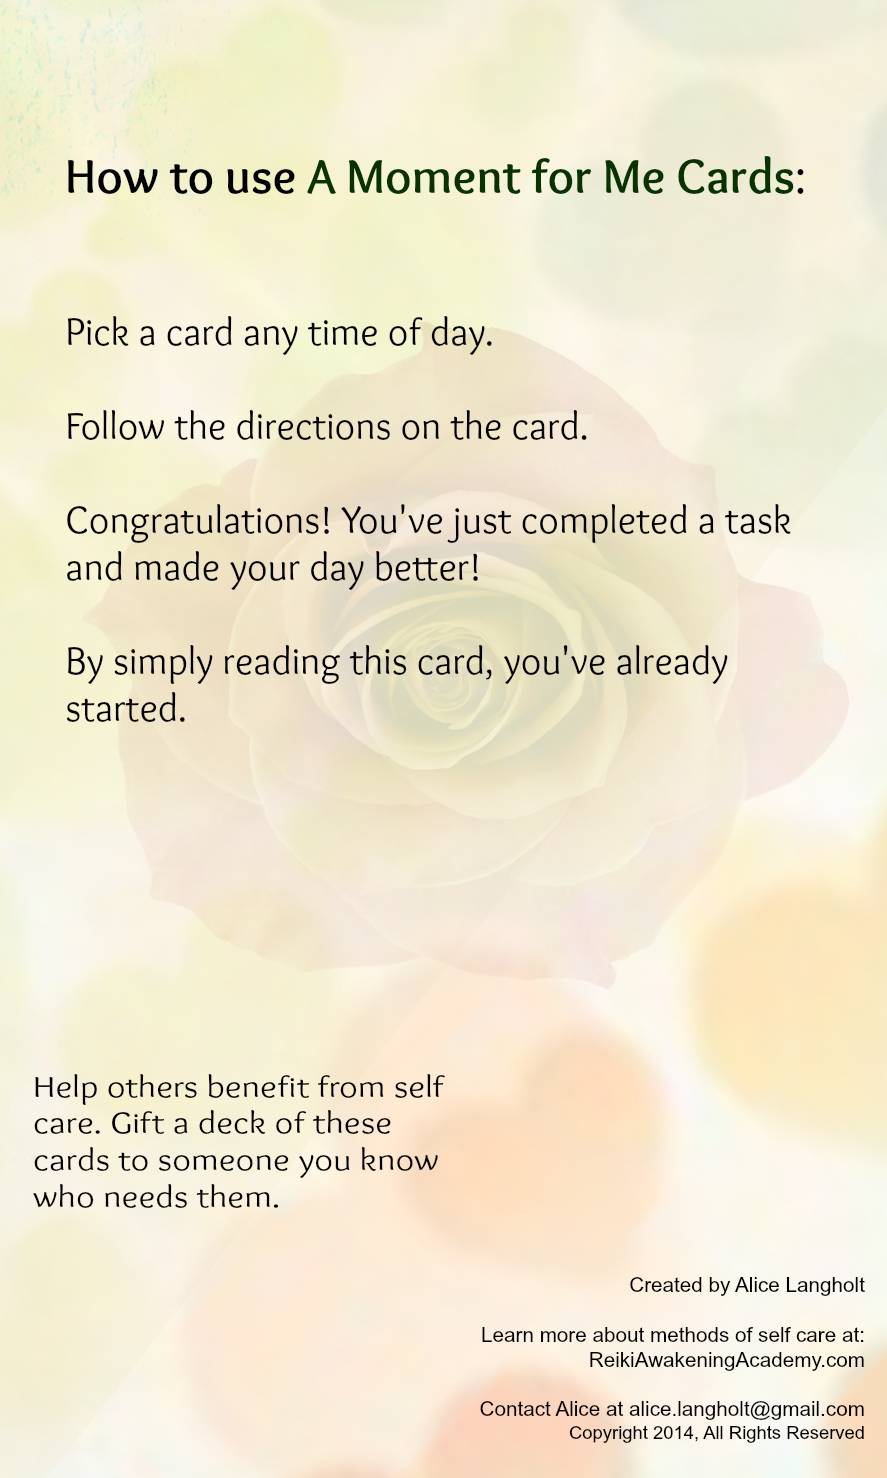 Moment for Me Directions card